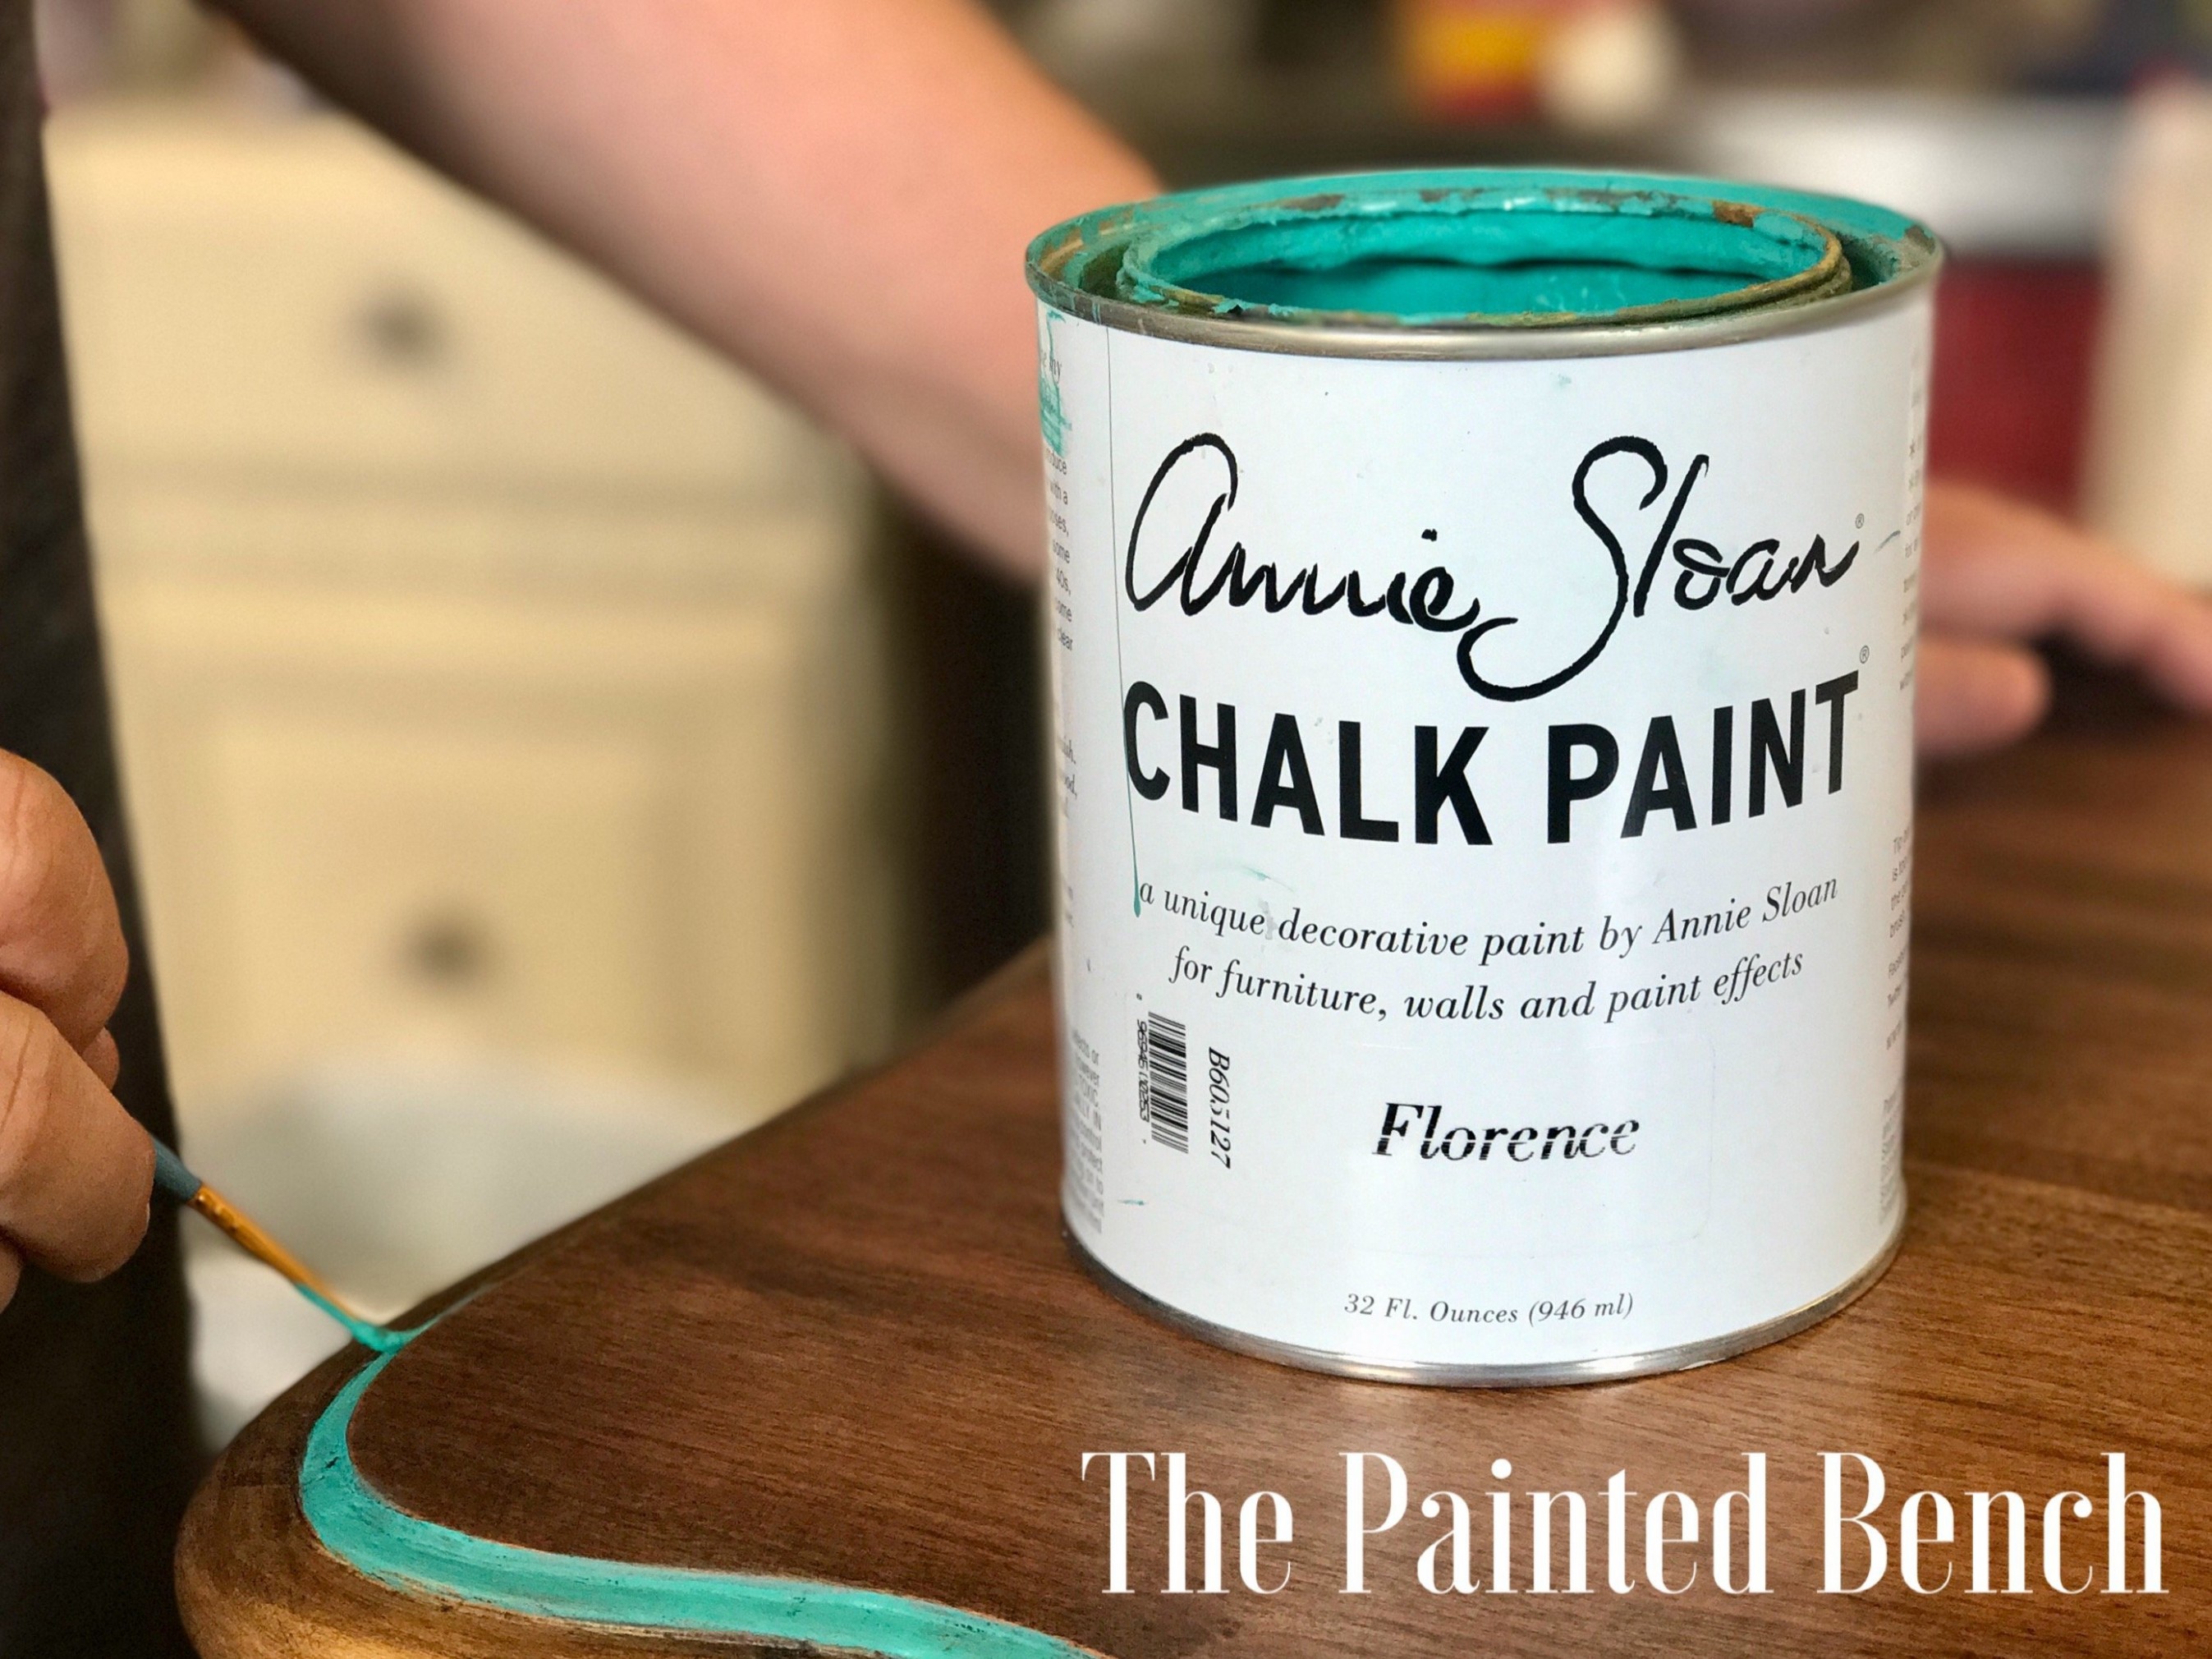 How To Repurpose A Dresser With Annie Sloan Paint The Painted Bench Annie Sloan Chalk Paint London Ontario